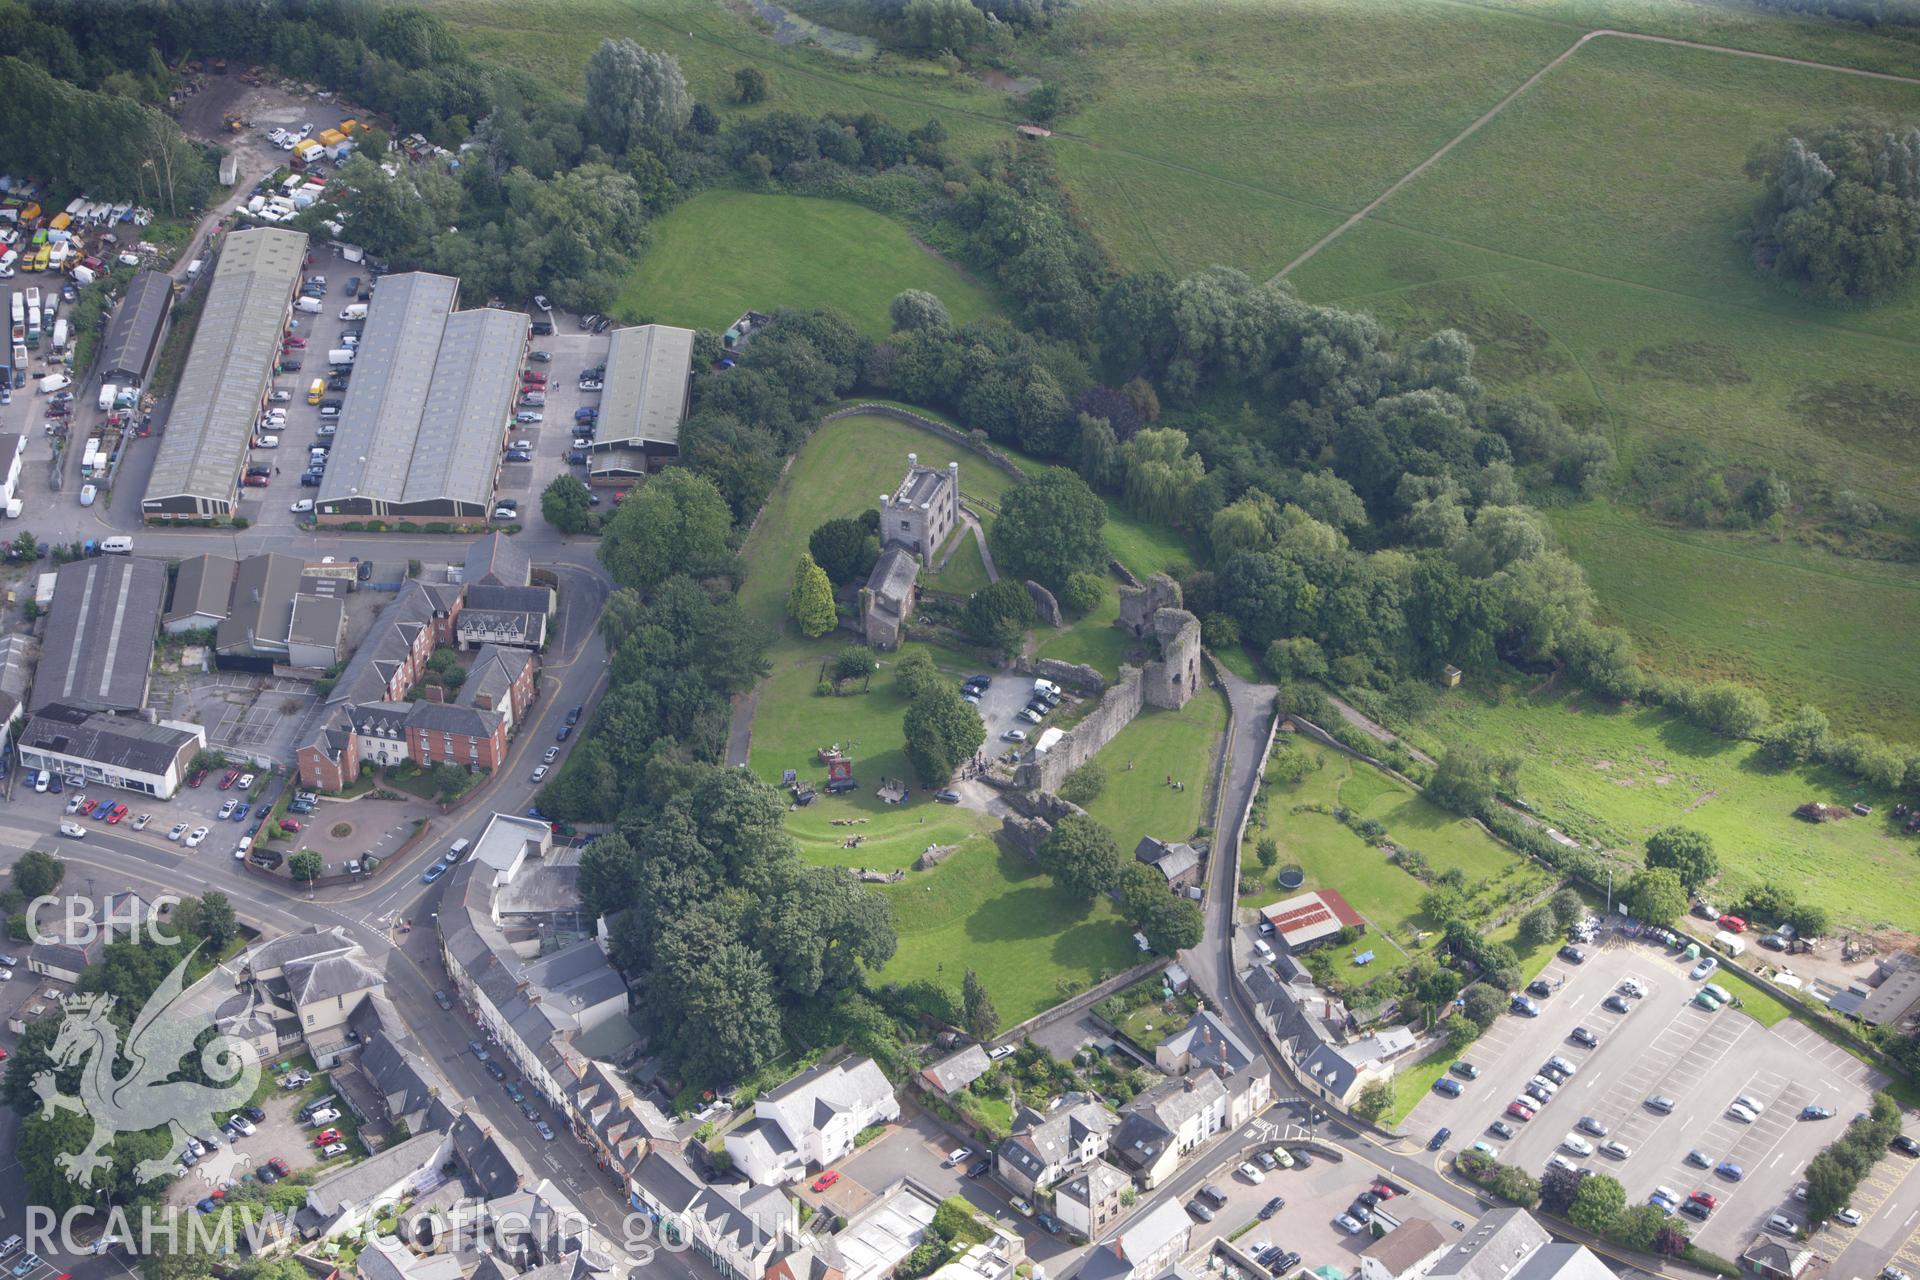 RCAHMW colour oblique aerial photograph of Abergavenny Castle. Taken on 23 July 2009 by Toby Driver